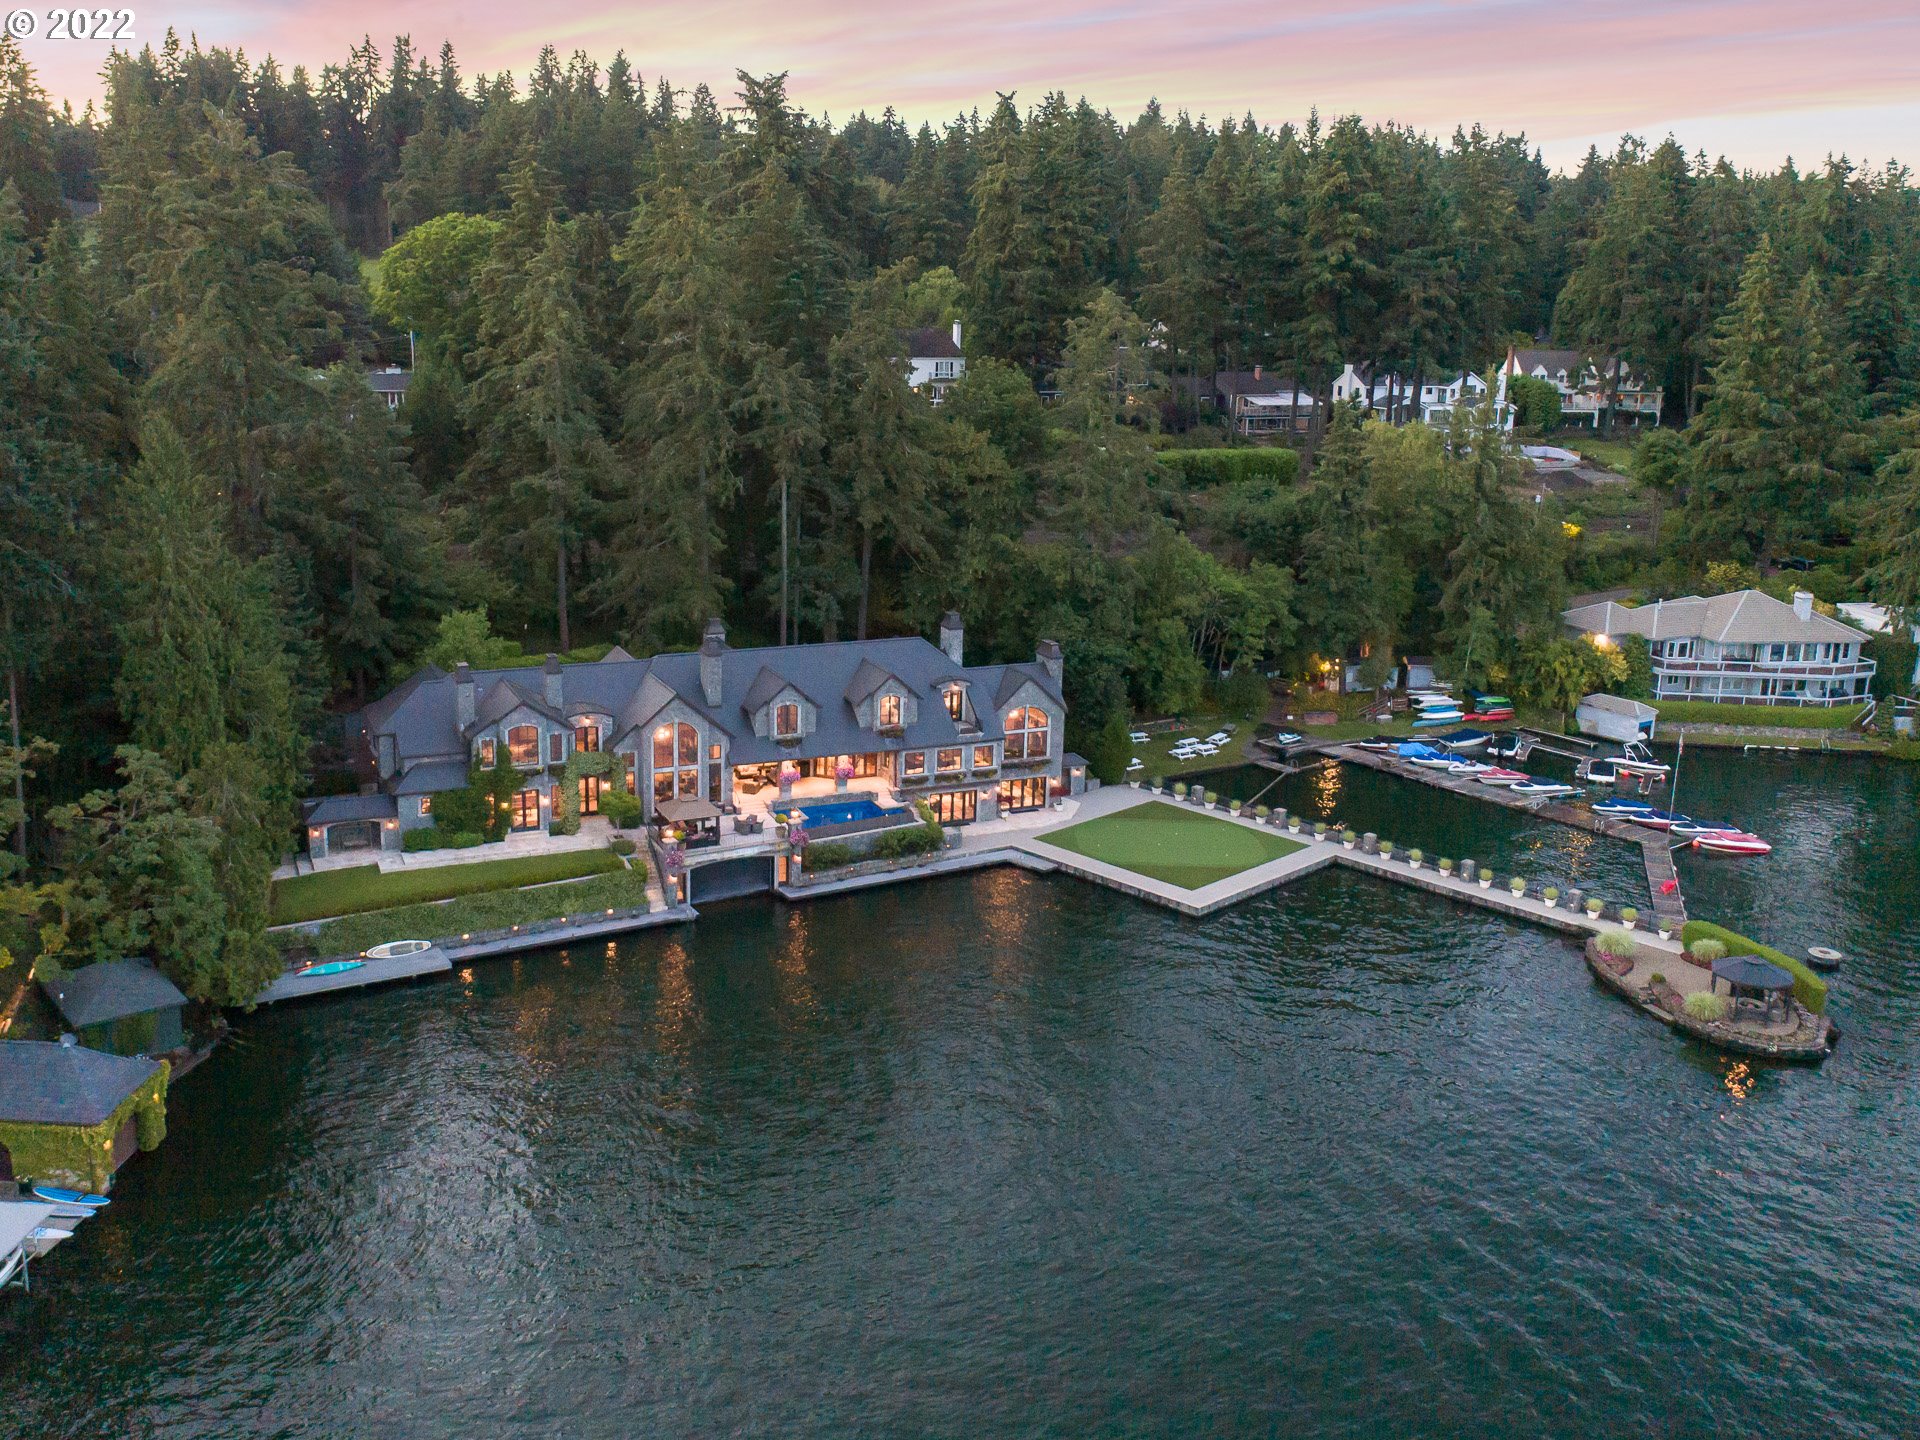 Awe-inspiring custom living awaits on a phenomenal stretch of coveted Oswego Lake!Step inside to unparalleled craftsmanship:grand architecture, elevator, in-home 2-lift boathouse, billiards hall, theater, gym w/sauna, opulent bdrm suites & slate/basalt/copper exterior.Throw open wall of doors to sprawling stone terraces w/infinity pool & spa, waterfront putting green, private dock, island fire pit & endless water sports.This is Oregon's premiere private lakefront estate near luxurious amenities.